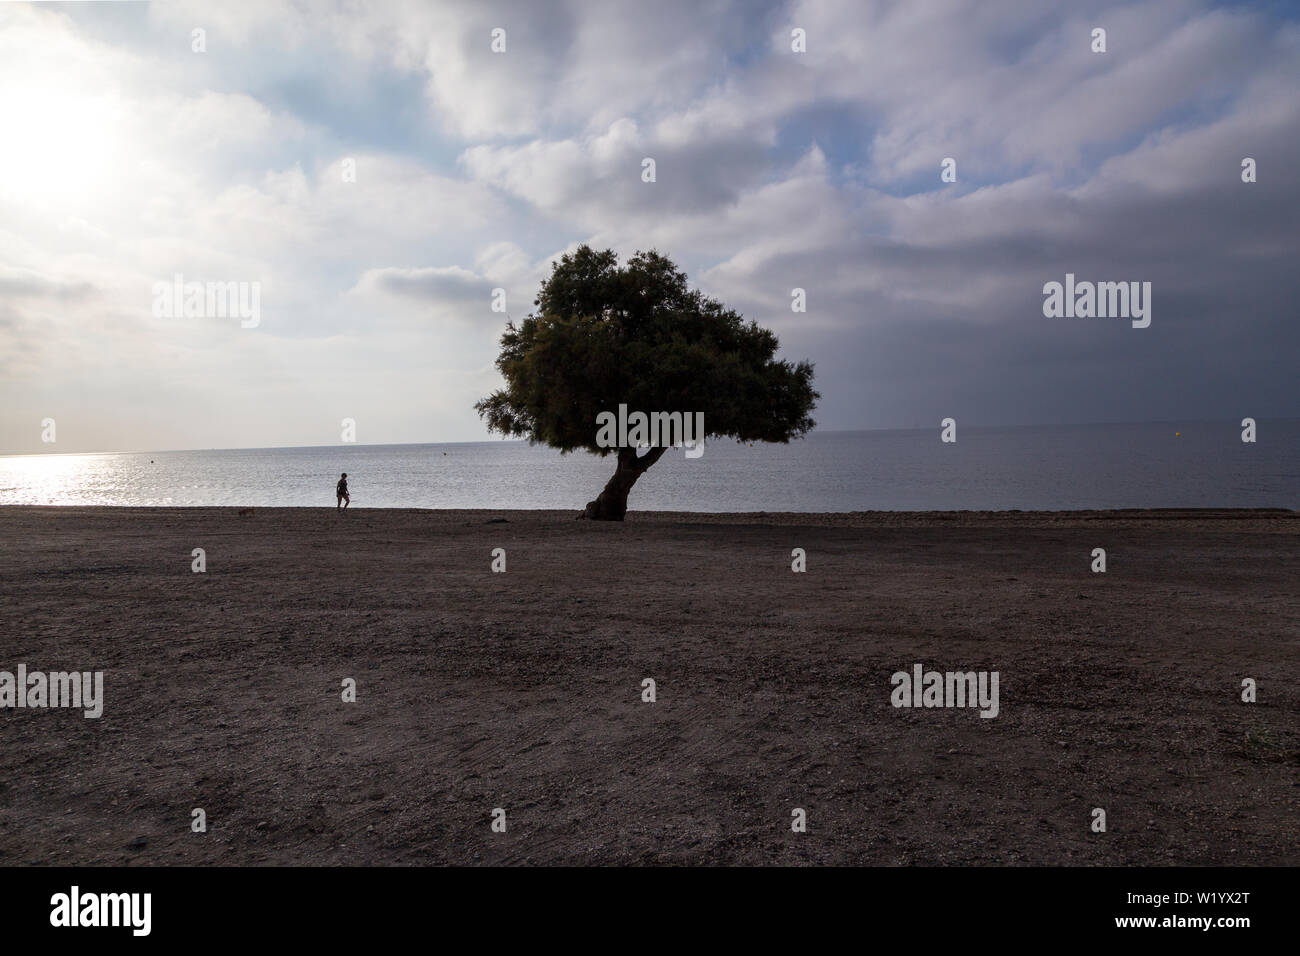 one person walking in stormy weather next to tree on a beach in Spain Stock Photo